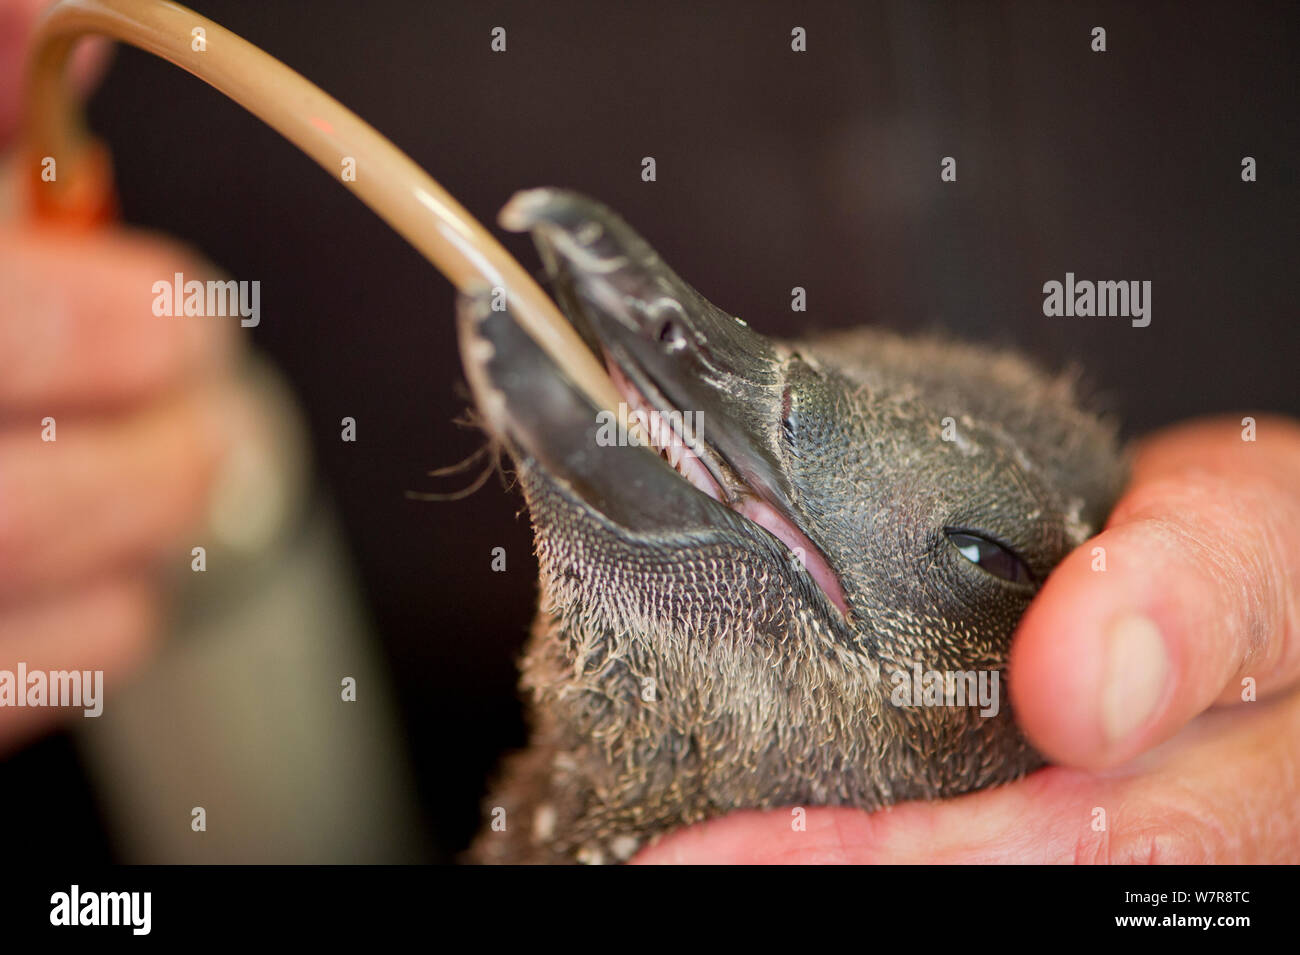 African penguin chick (Spheniscus demersus) being fed liquid from tube, part of Chick Bolstering Project, Southern African Foundation for the Conservation of Coastal Birds (SANCCOB), South Africa captive, May 2012. Stock Photo